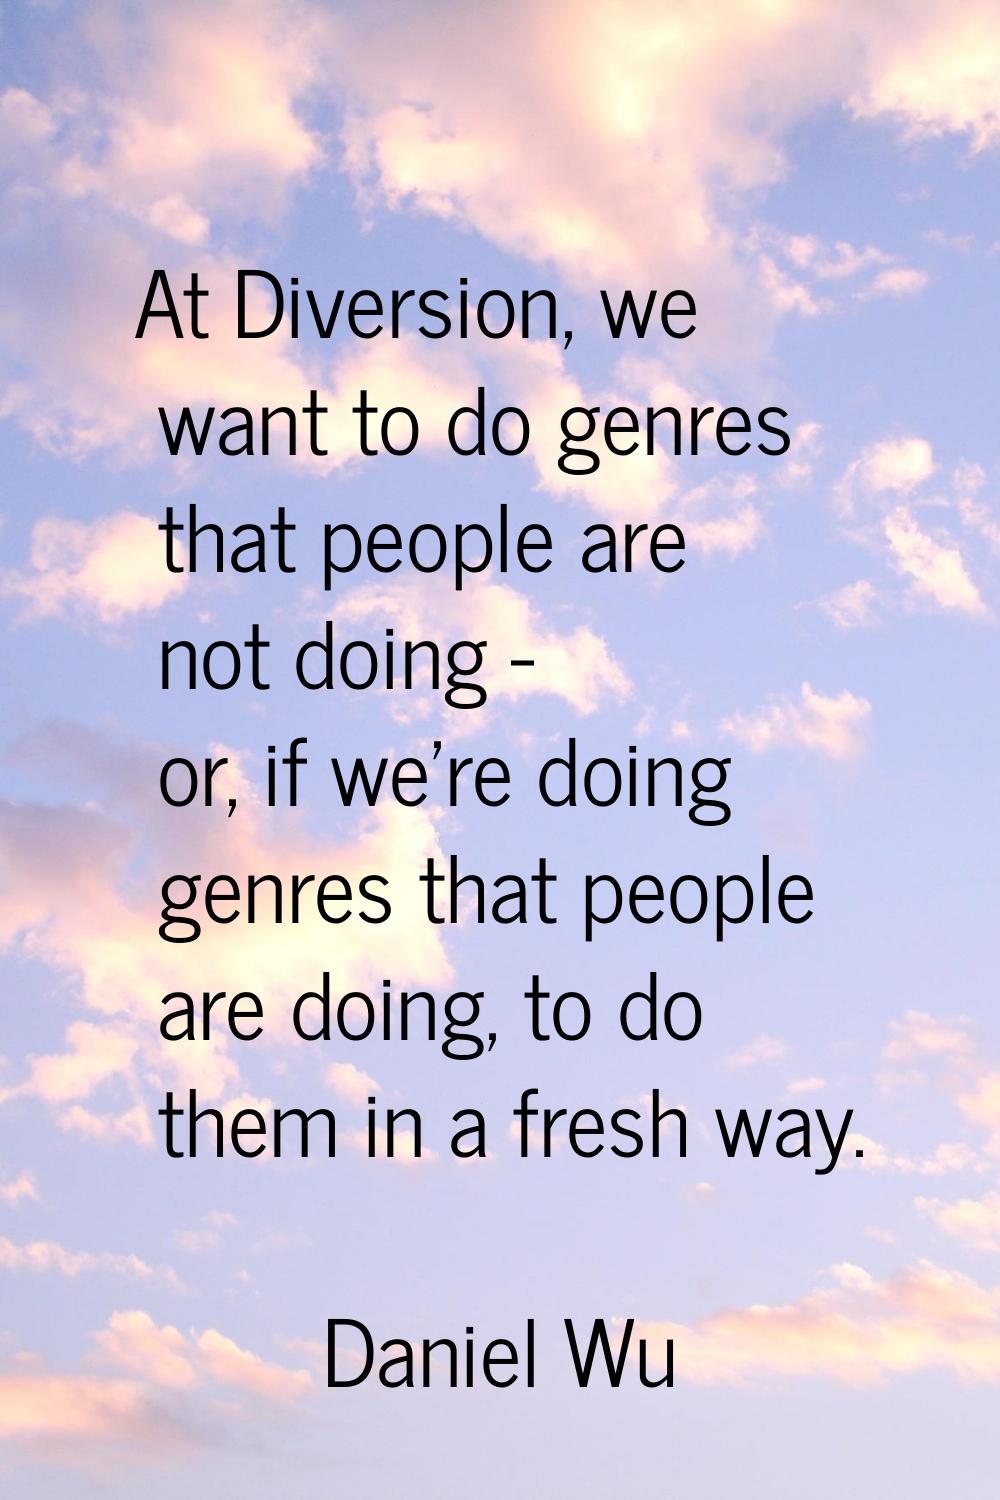 At Diversion, we want to do genres that people are not doing - or, if we're doing genres that peopl